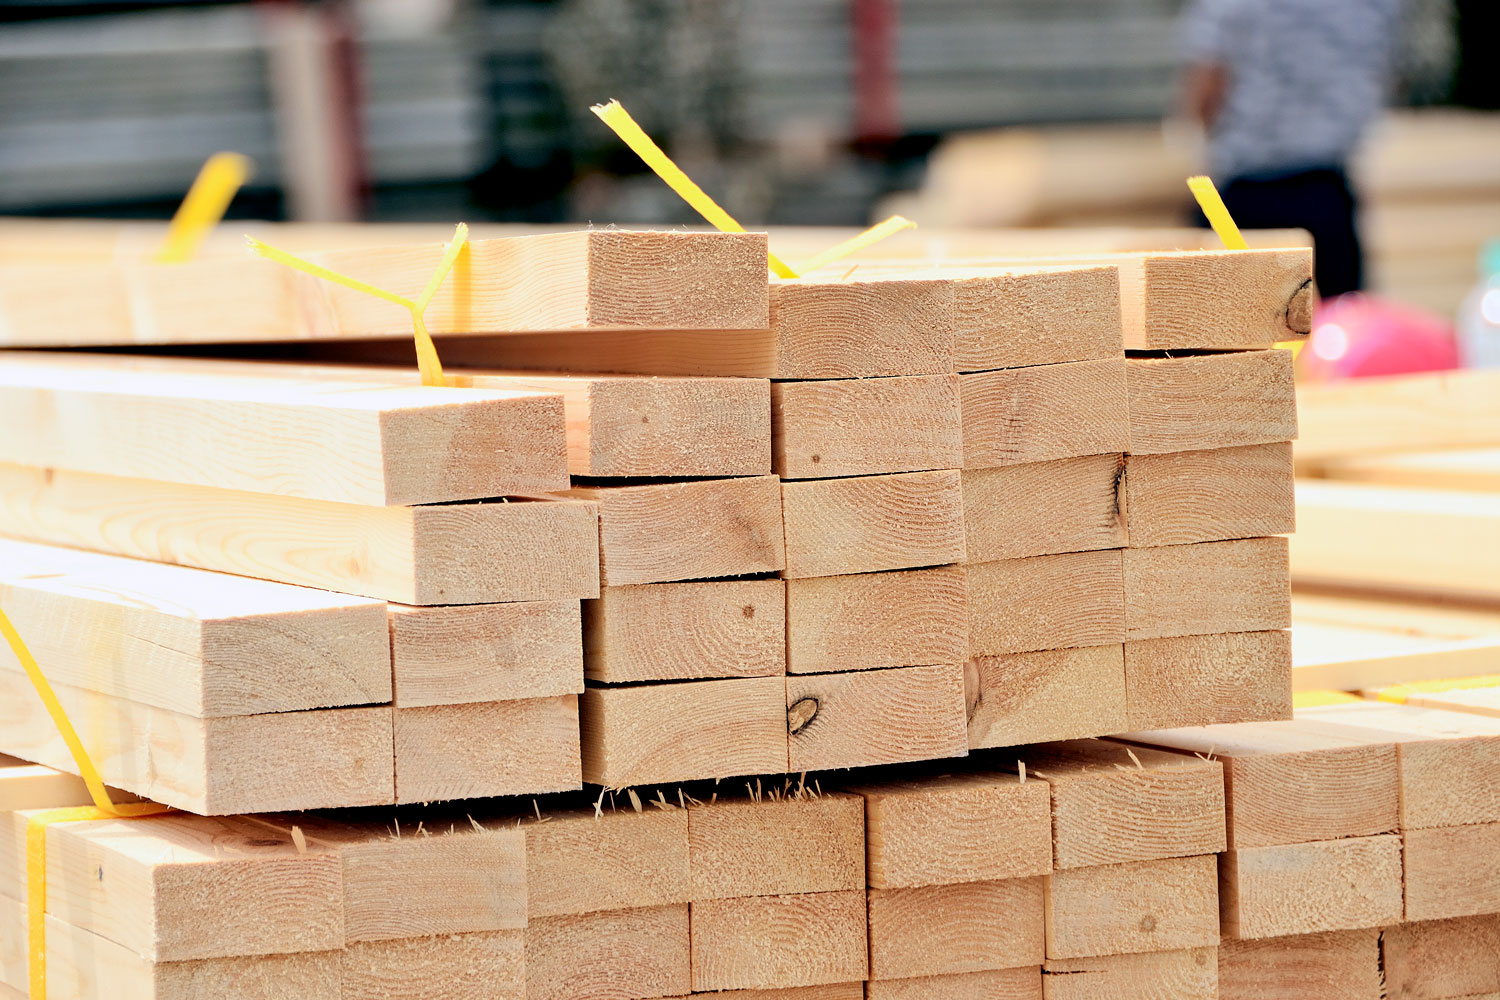 A stockpile of 2x4 wood at a construction site